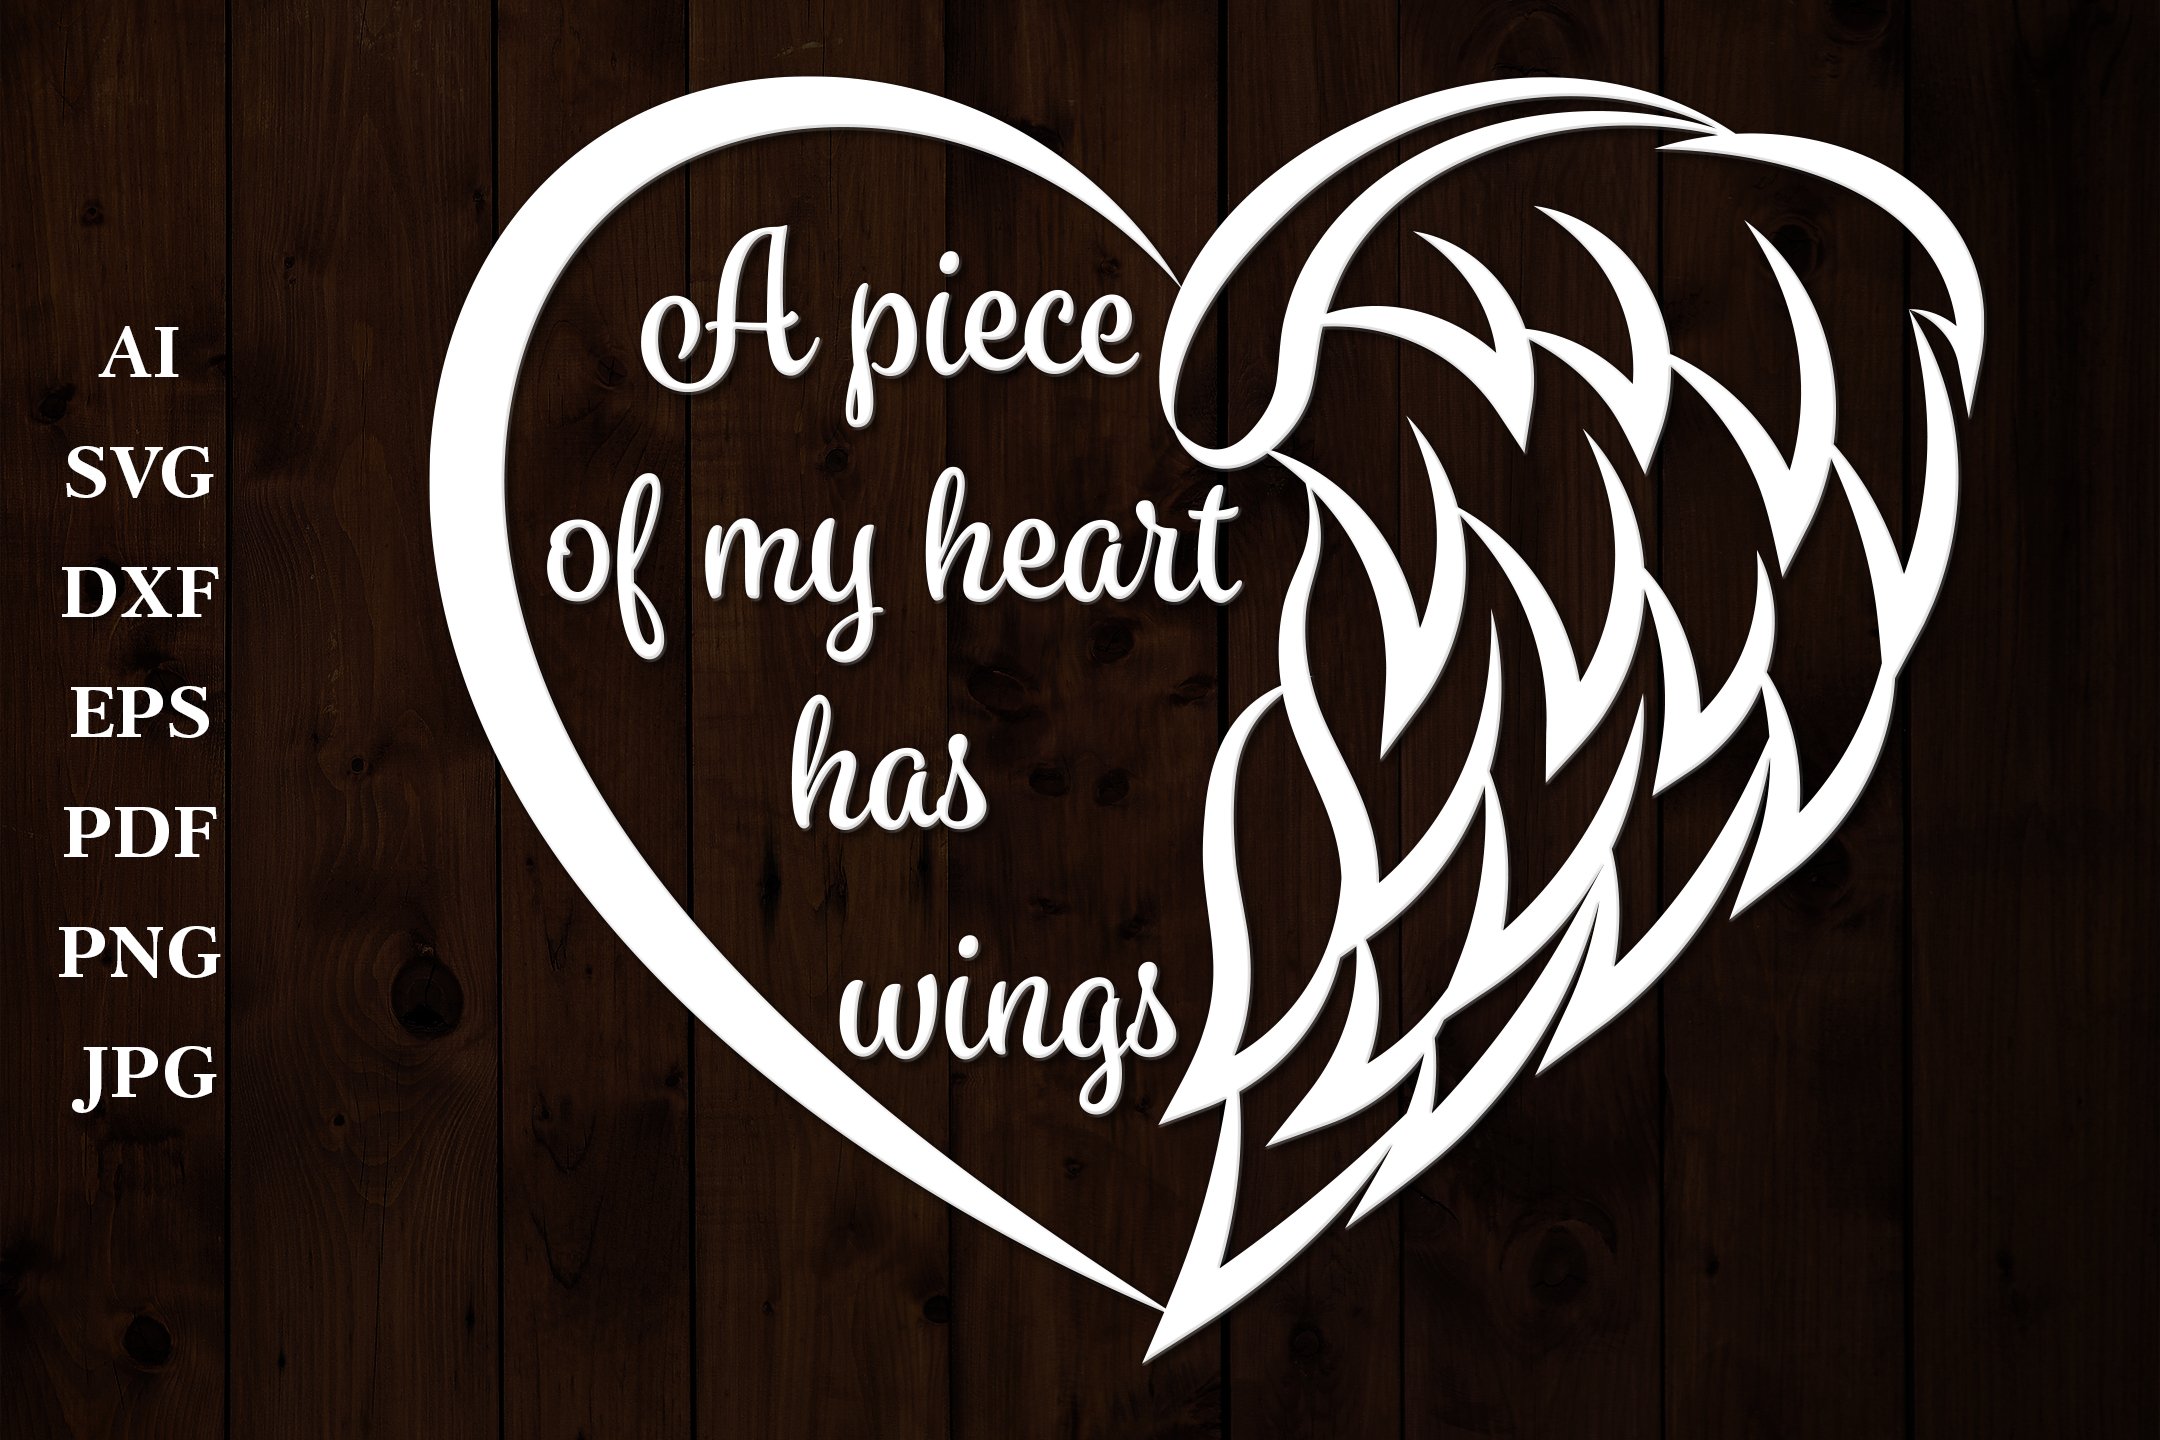 Angel wings are depicted on the heart.